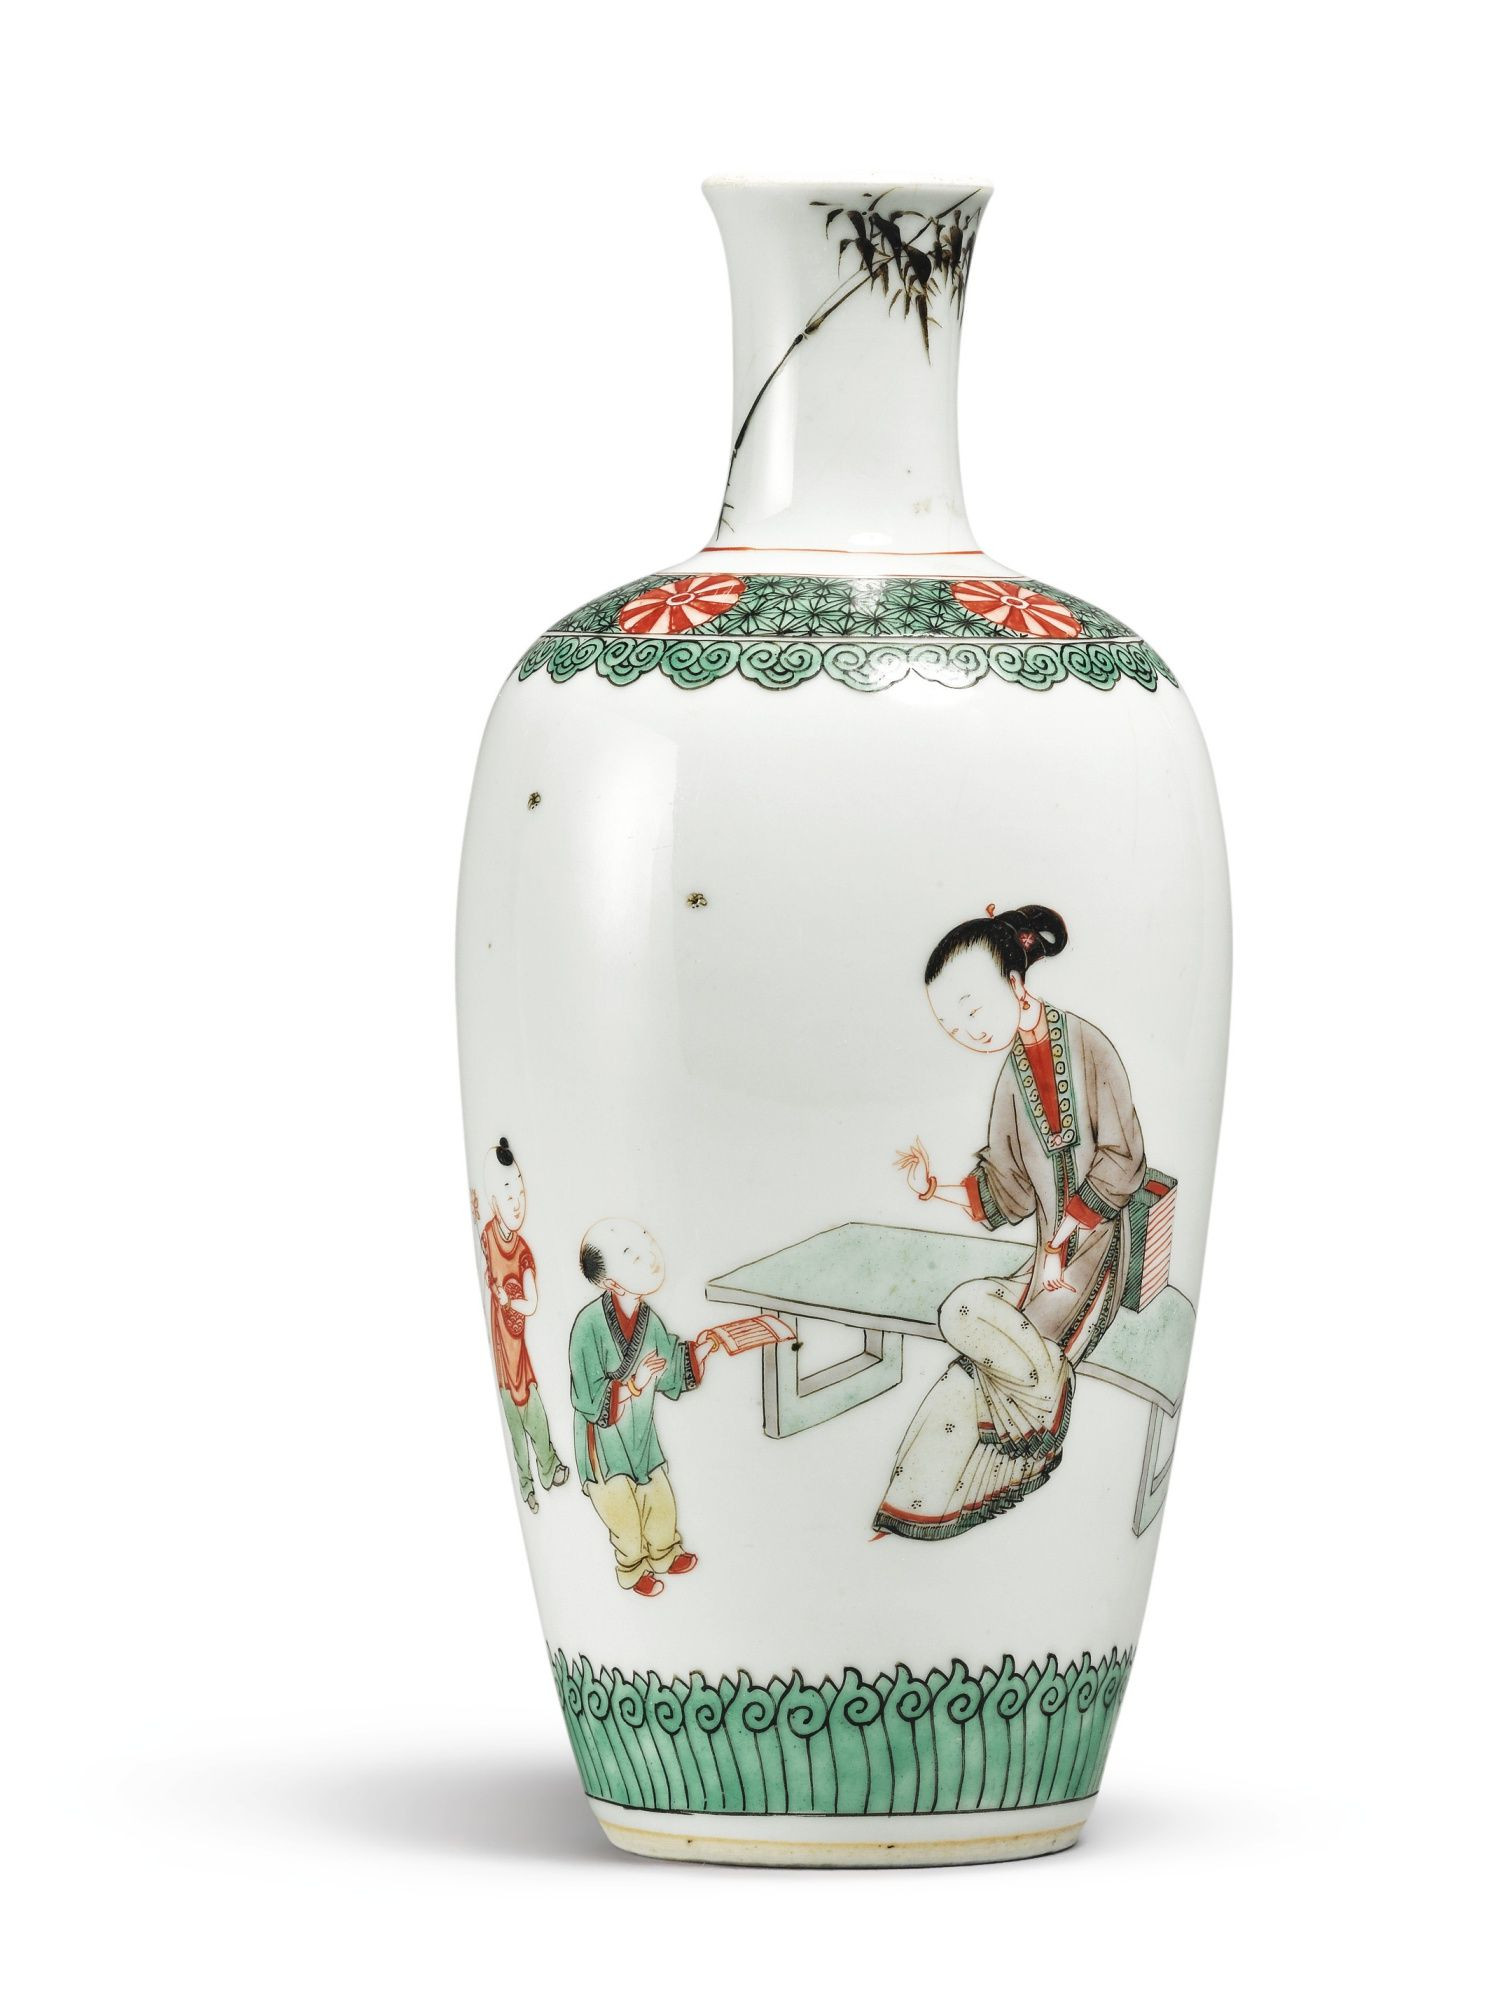 27 Recommended Chinese Meiping Vase 2024 free download chinese meiping vase of an underglaze blue and copper red vase meiping qing dyna for chinese famille verte ovoid vase qing dynasty kangxi period